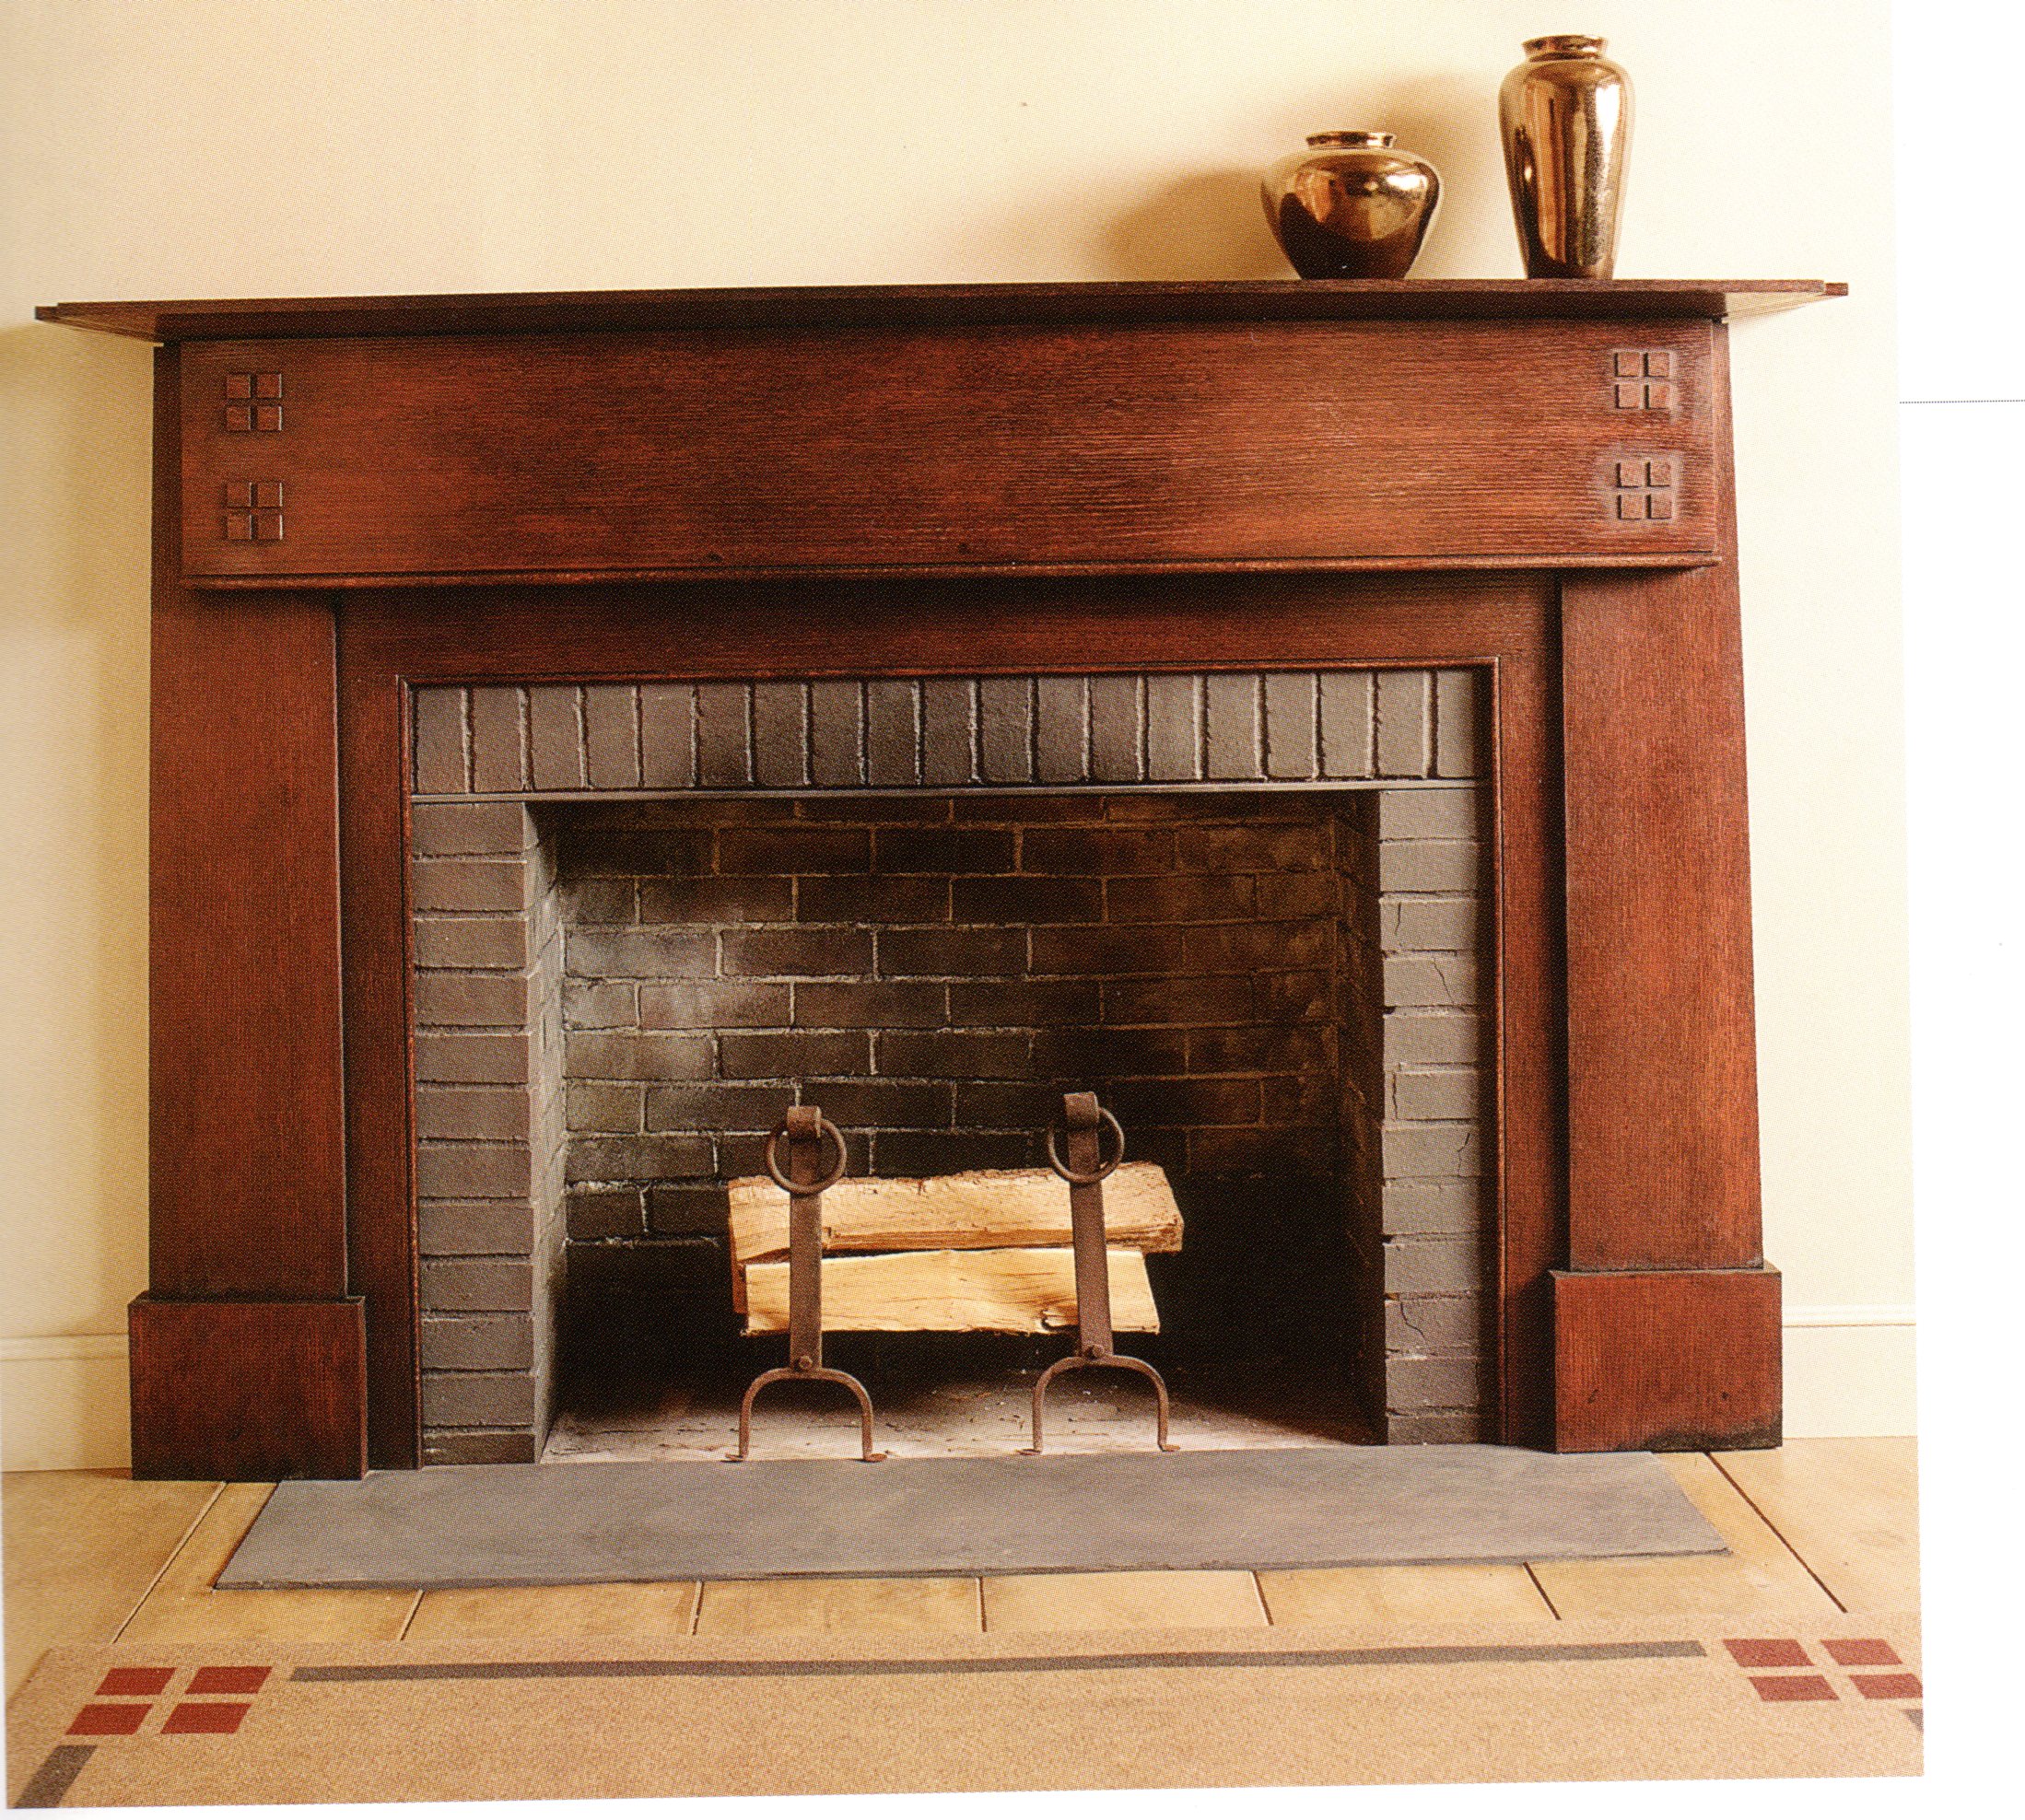 Craftsman Style Fireplace Mantels Awesome Craftsman Style Mantel & Bookcases